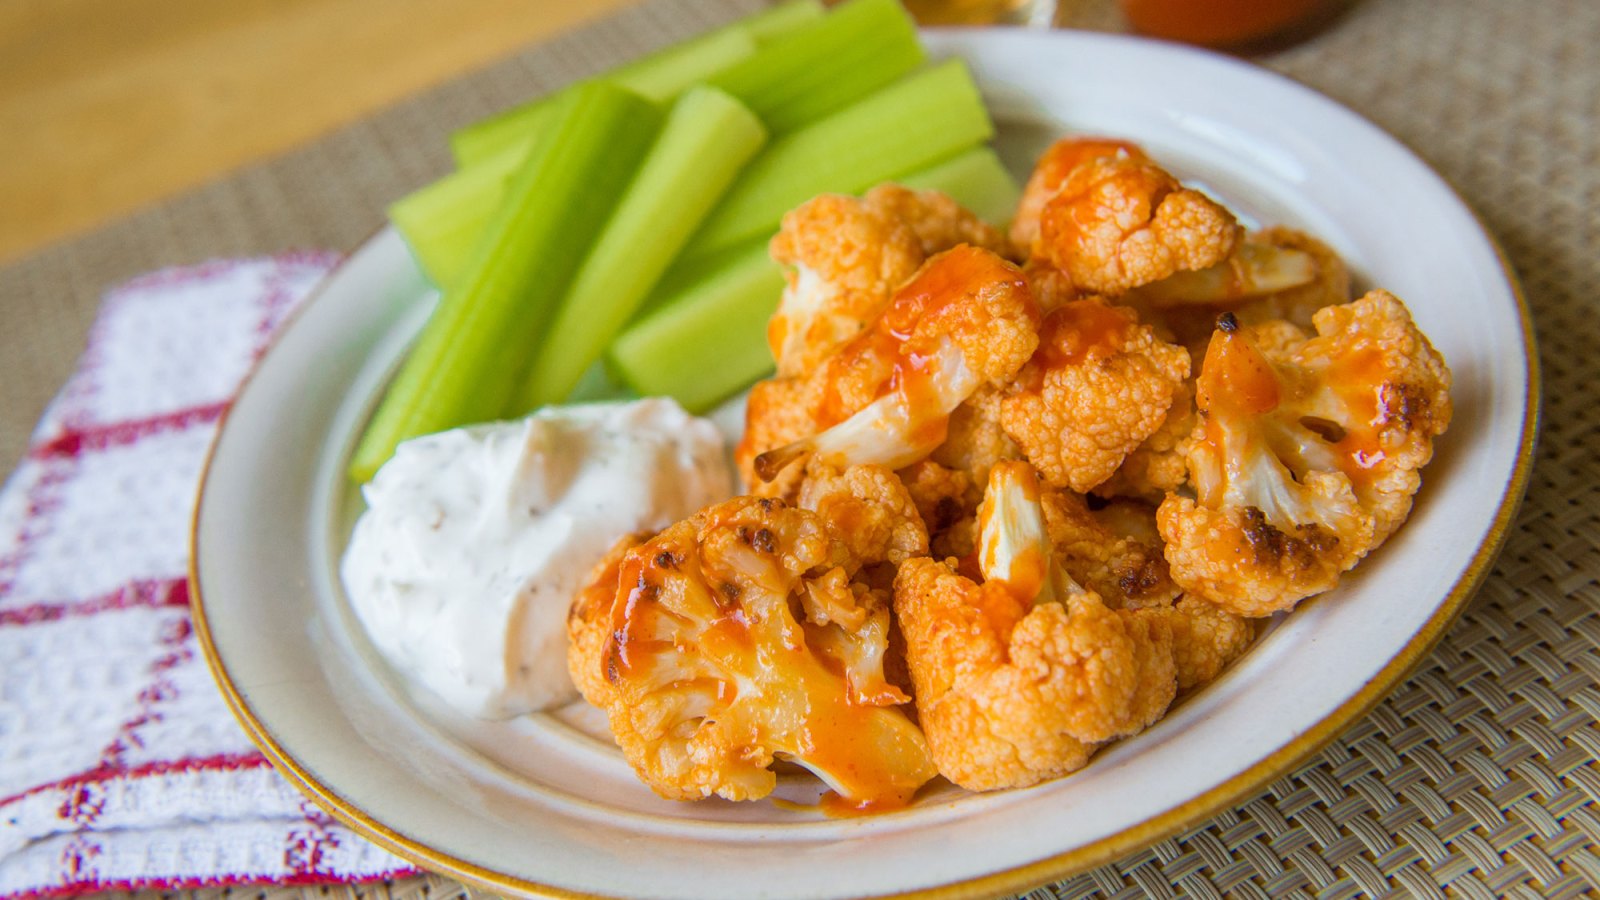 Spice Up Your Snack Game With This Buffalo Cauliflower ‘Wings’ Recipe